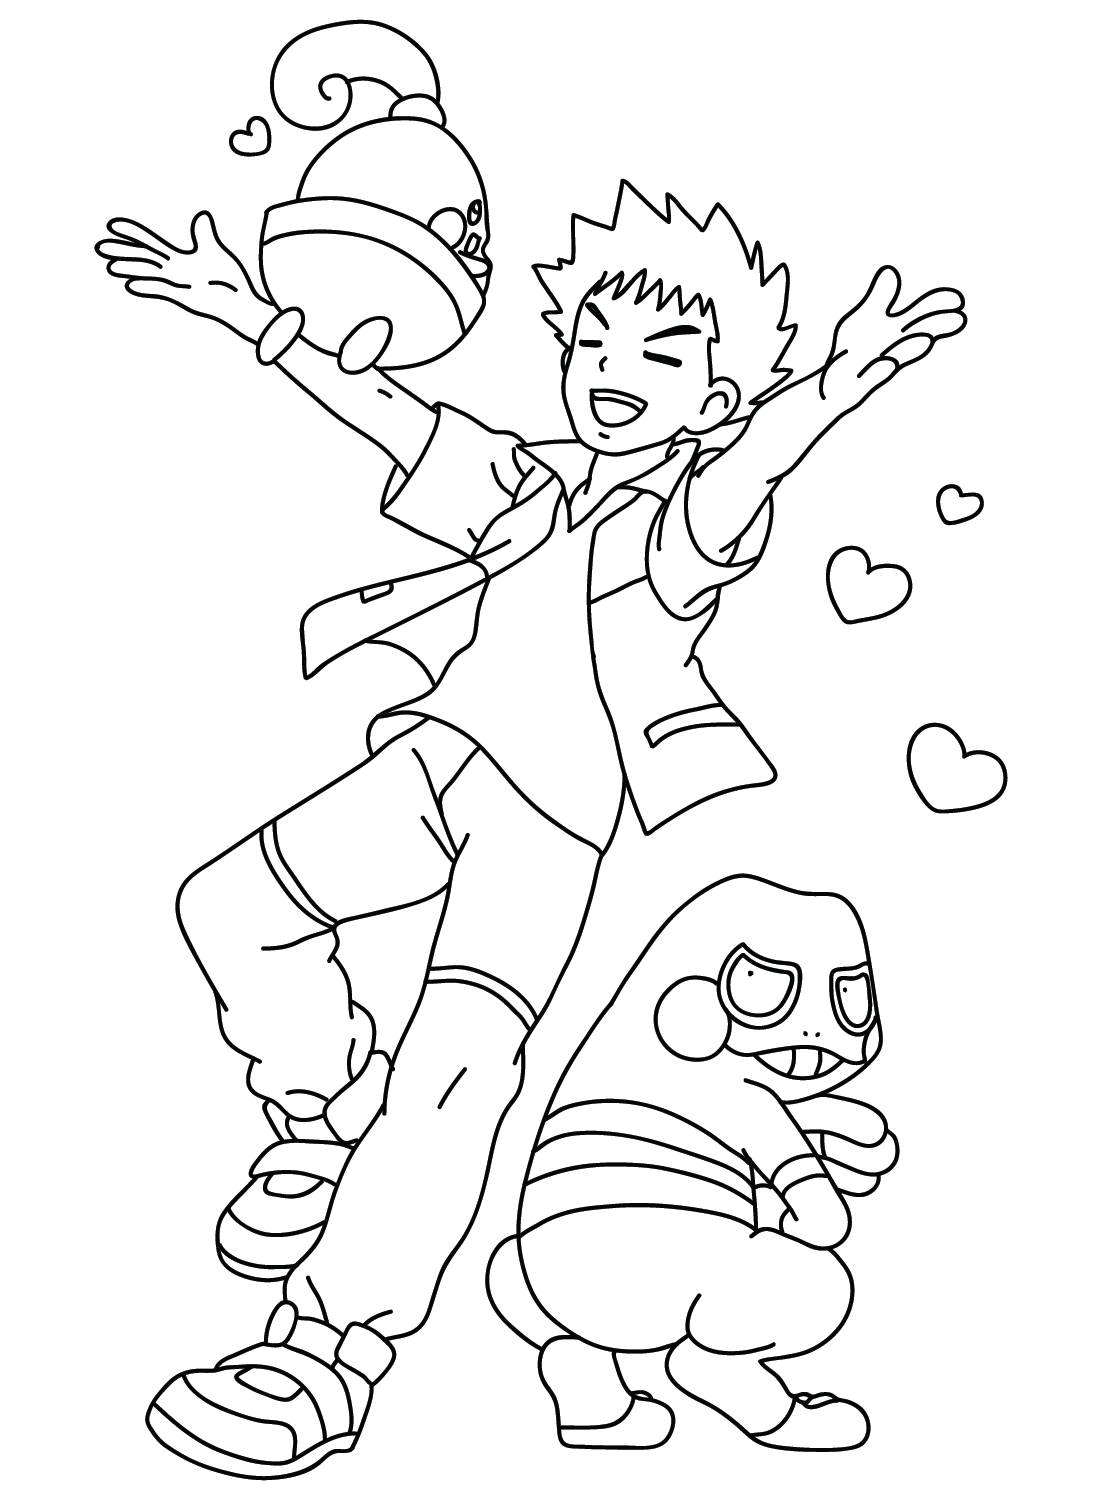 Brock Coloring Page Free from Brock